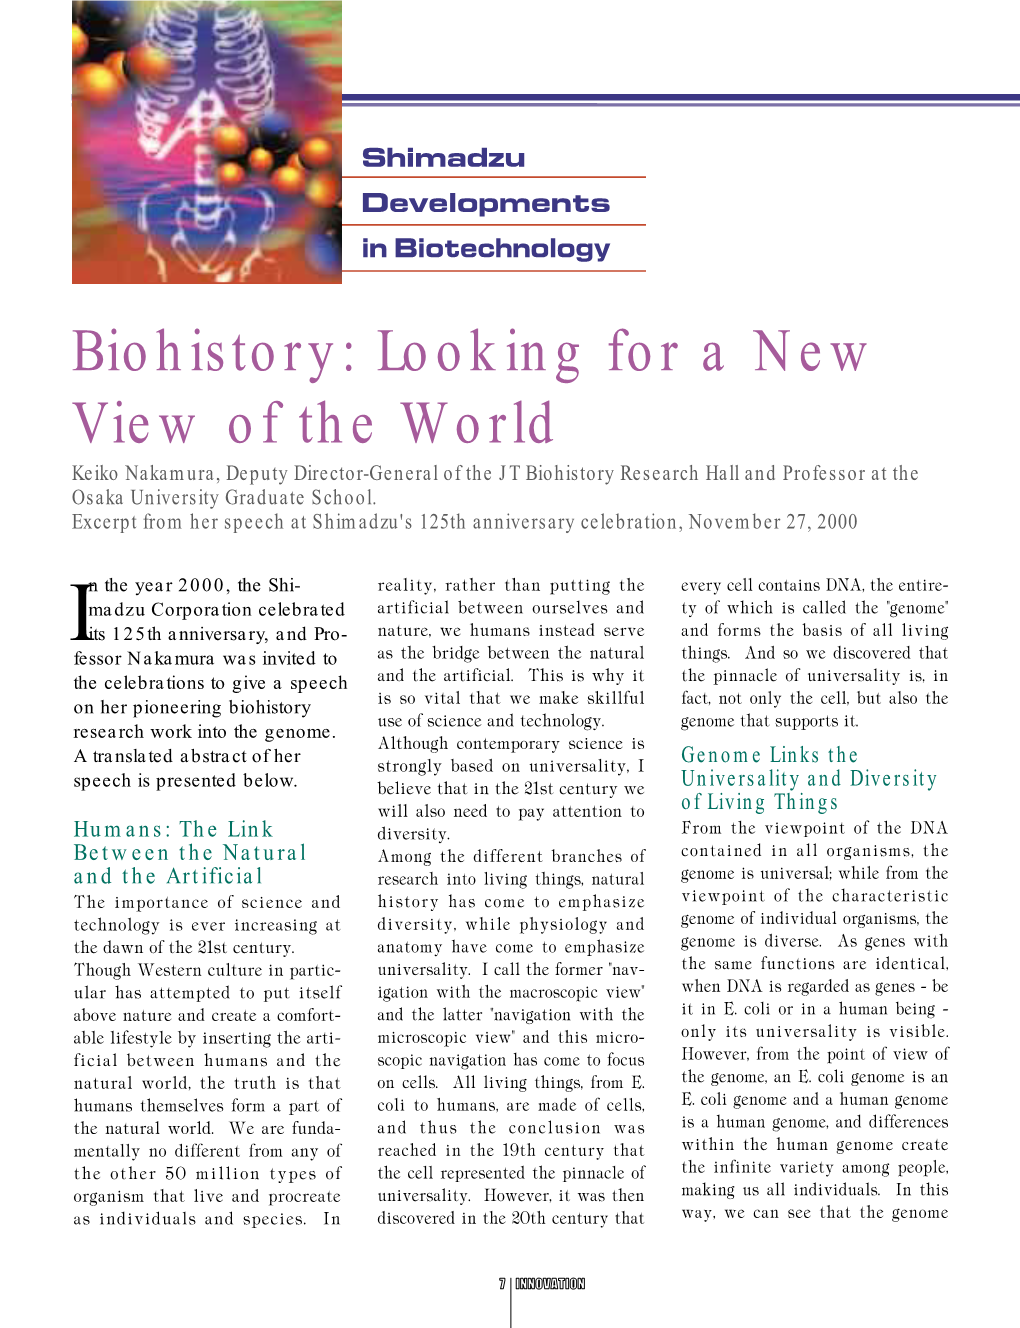 Biohistory: Looking for a New View of the World